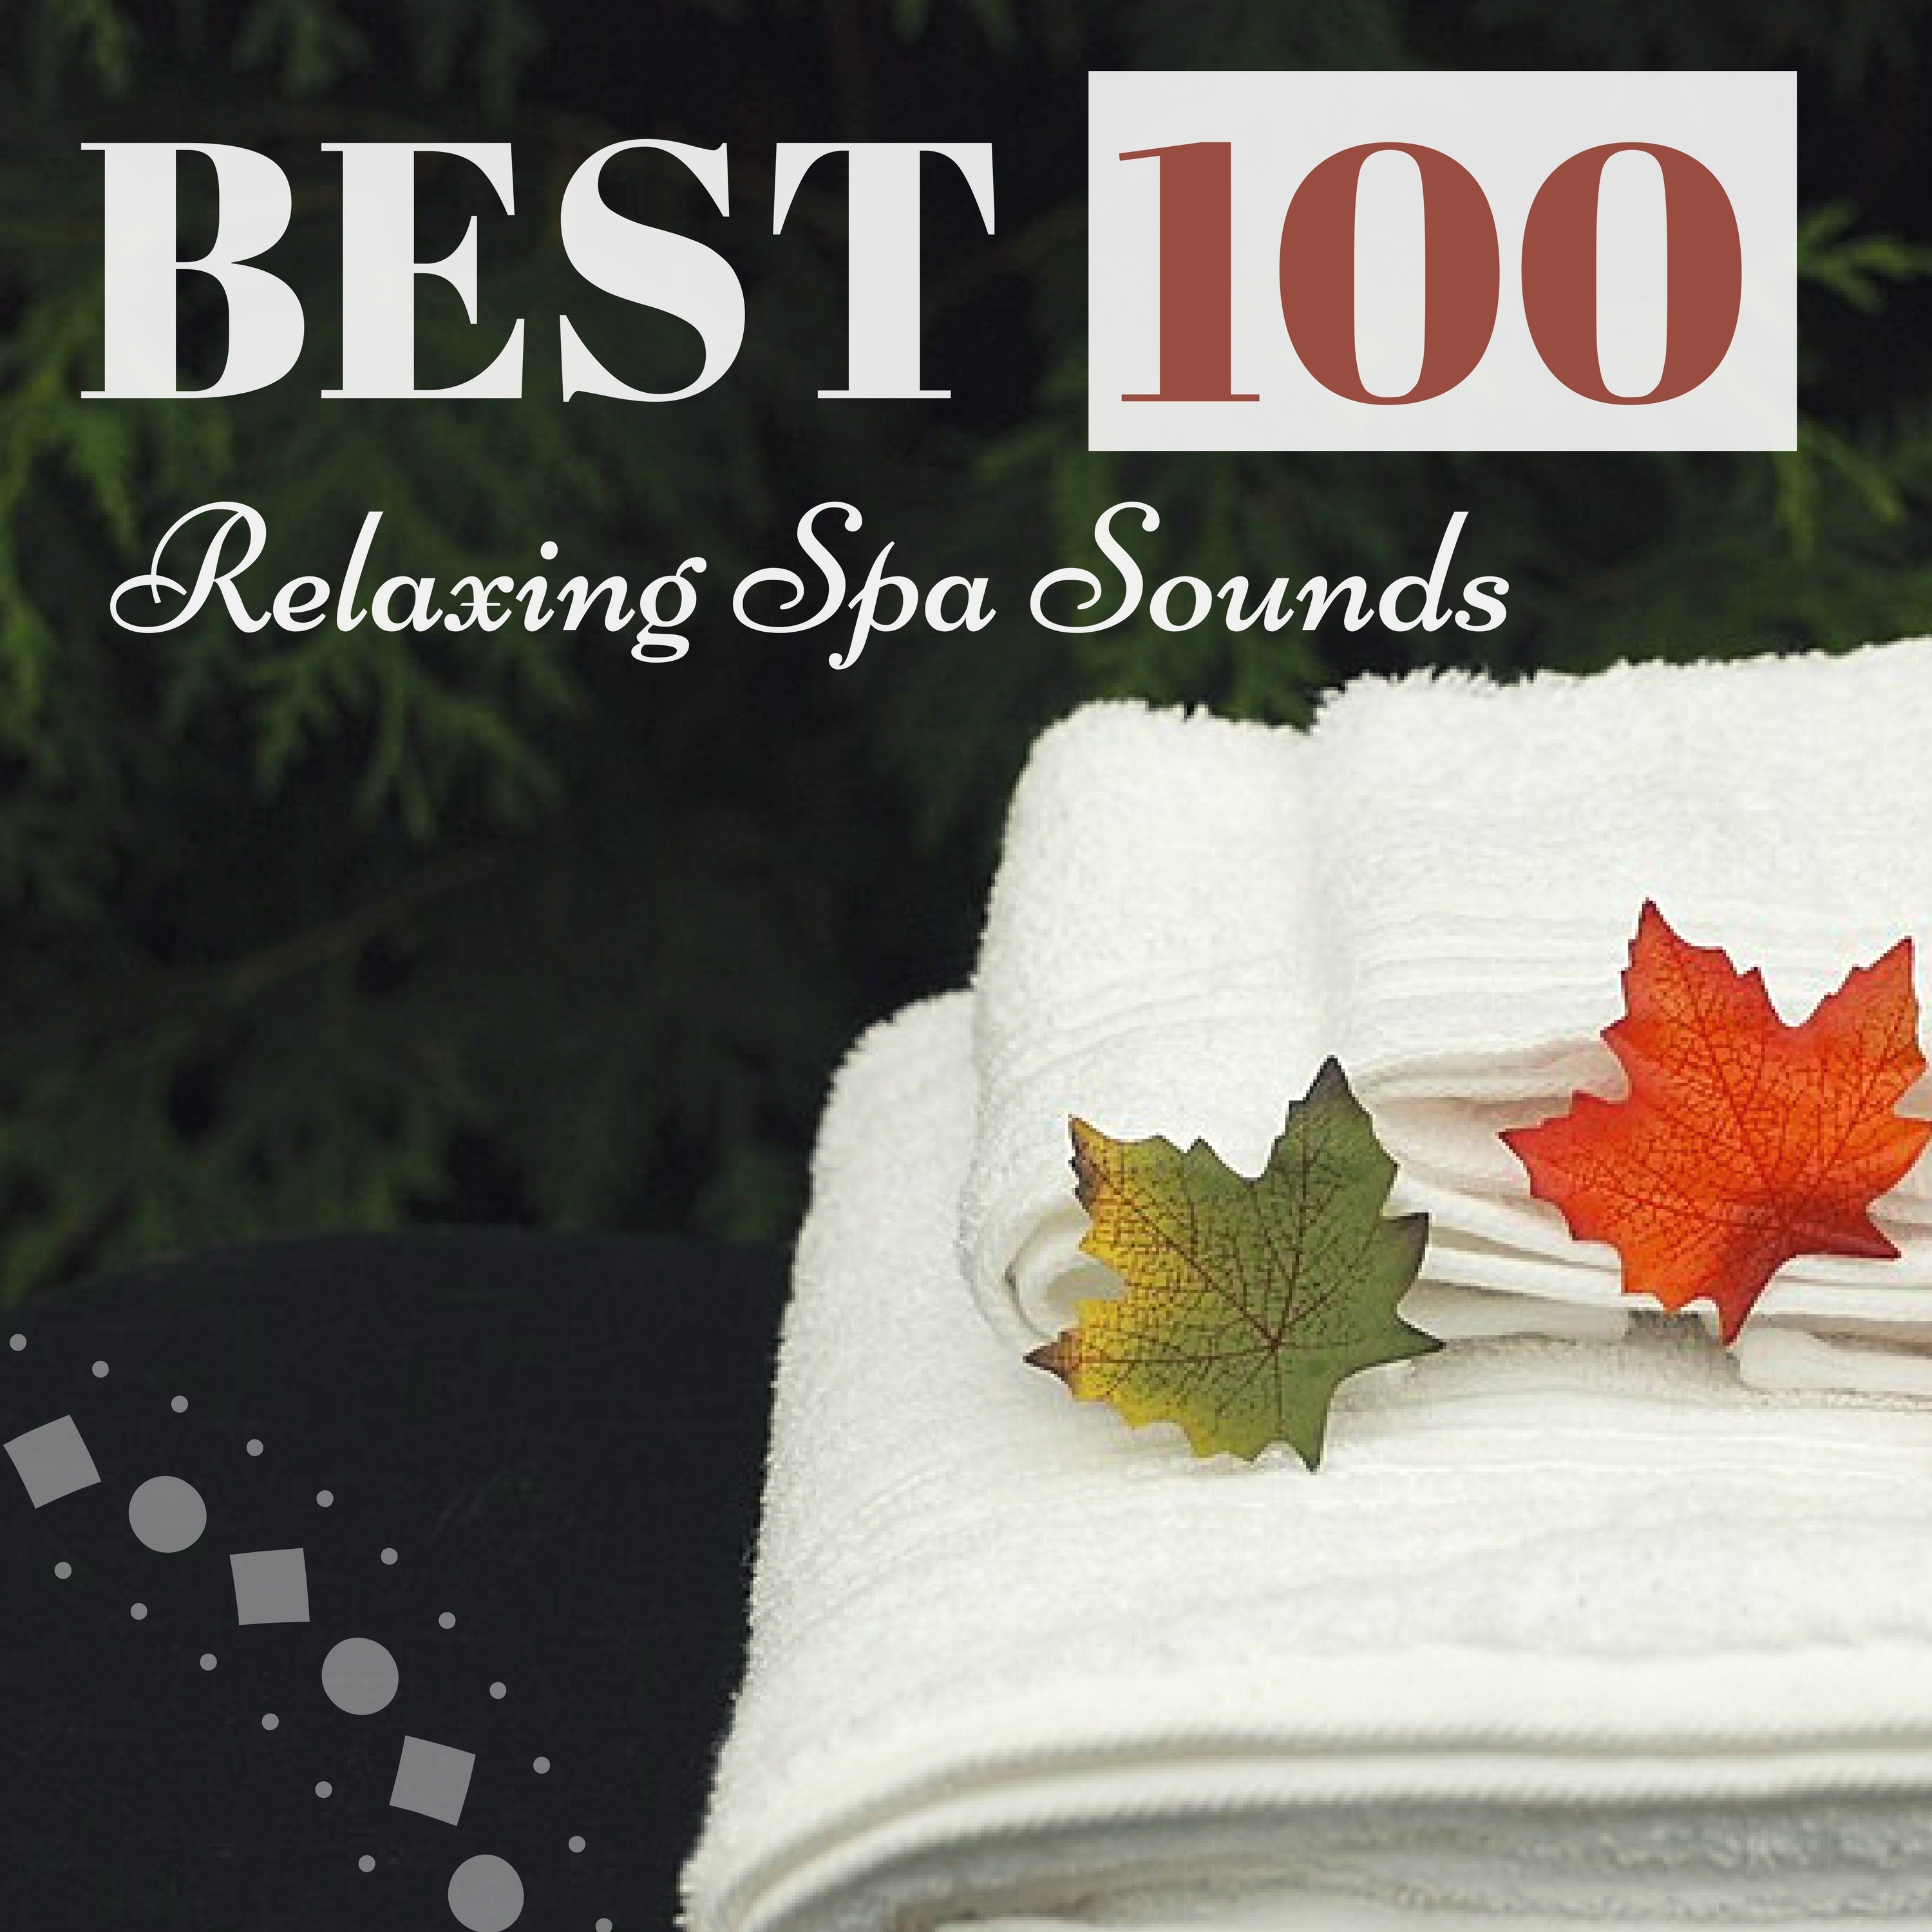 BEST 100 Relaxing Spa Sounds - Massage Music to Relax, Peaceful Background Songs